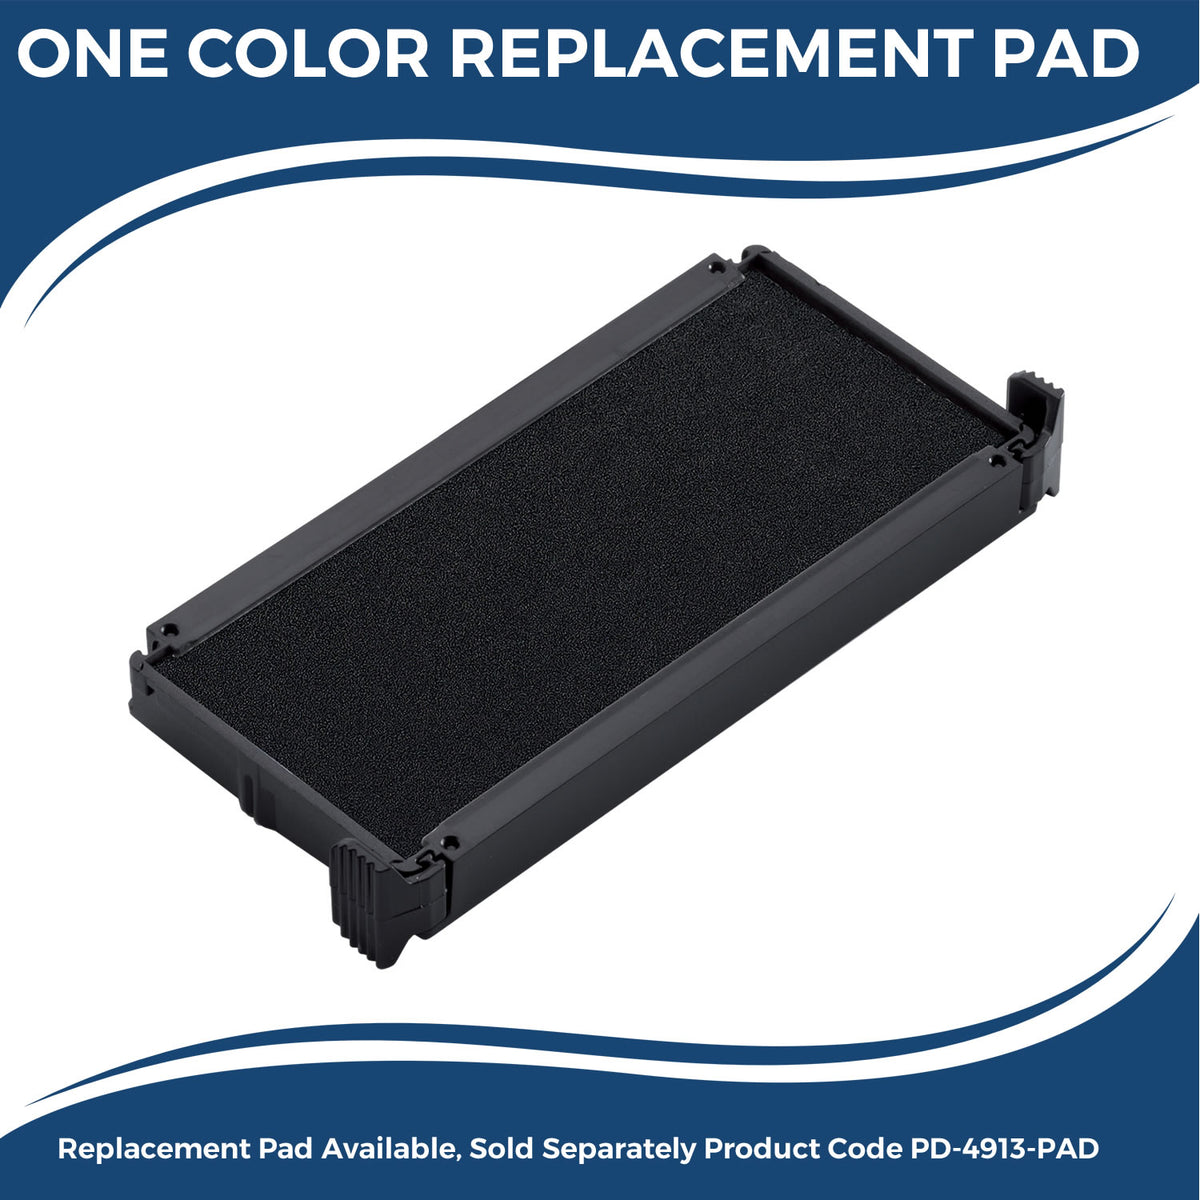 Large Self-Inking Bold Rough Draft Stamp 5662S Large Replacment Pad